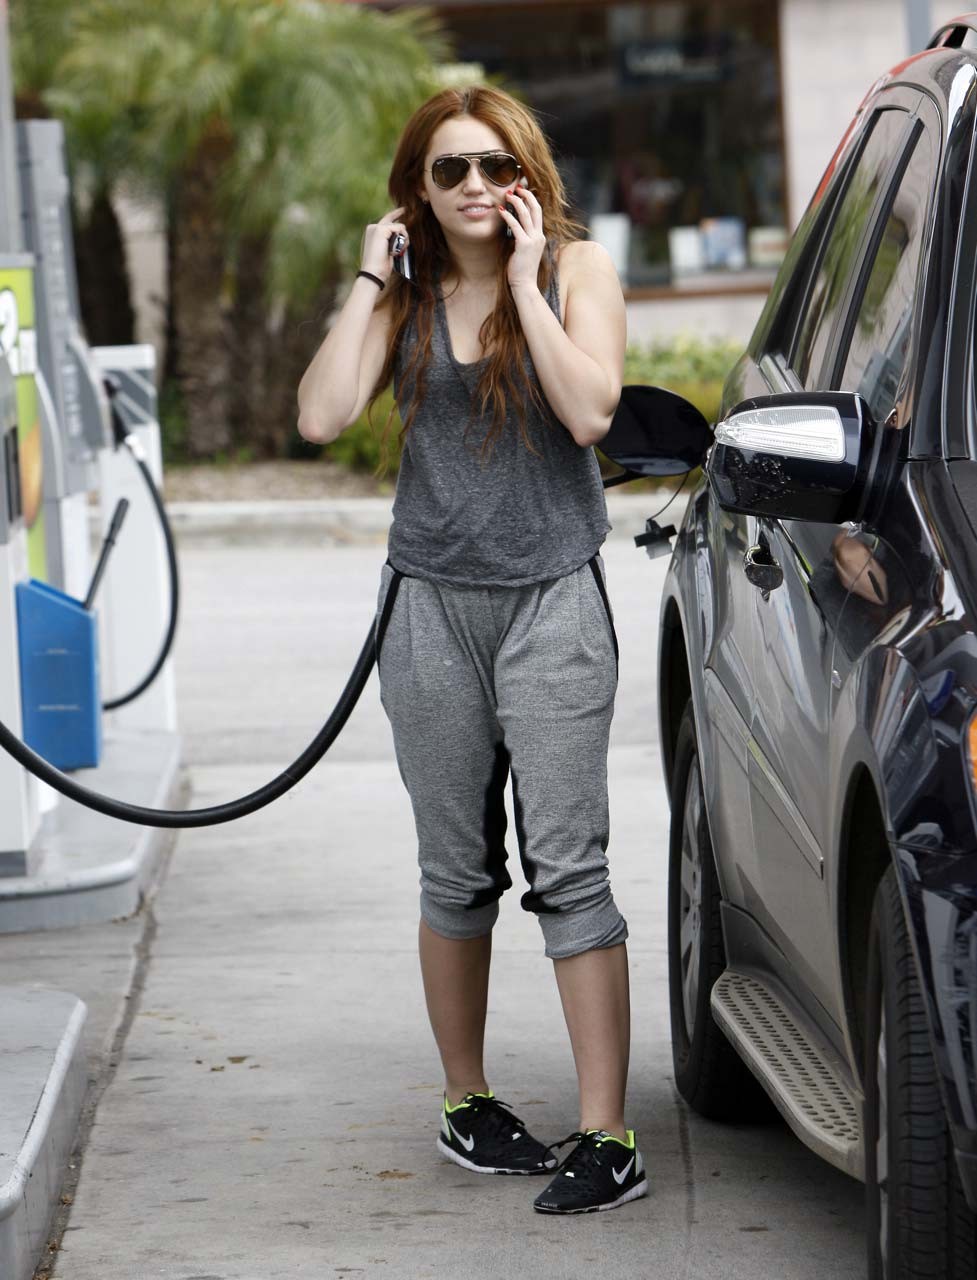 Miley Cyrus pumping gas on station and showing her great butt paparazzi pictures #75311306